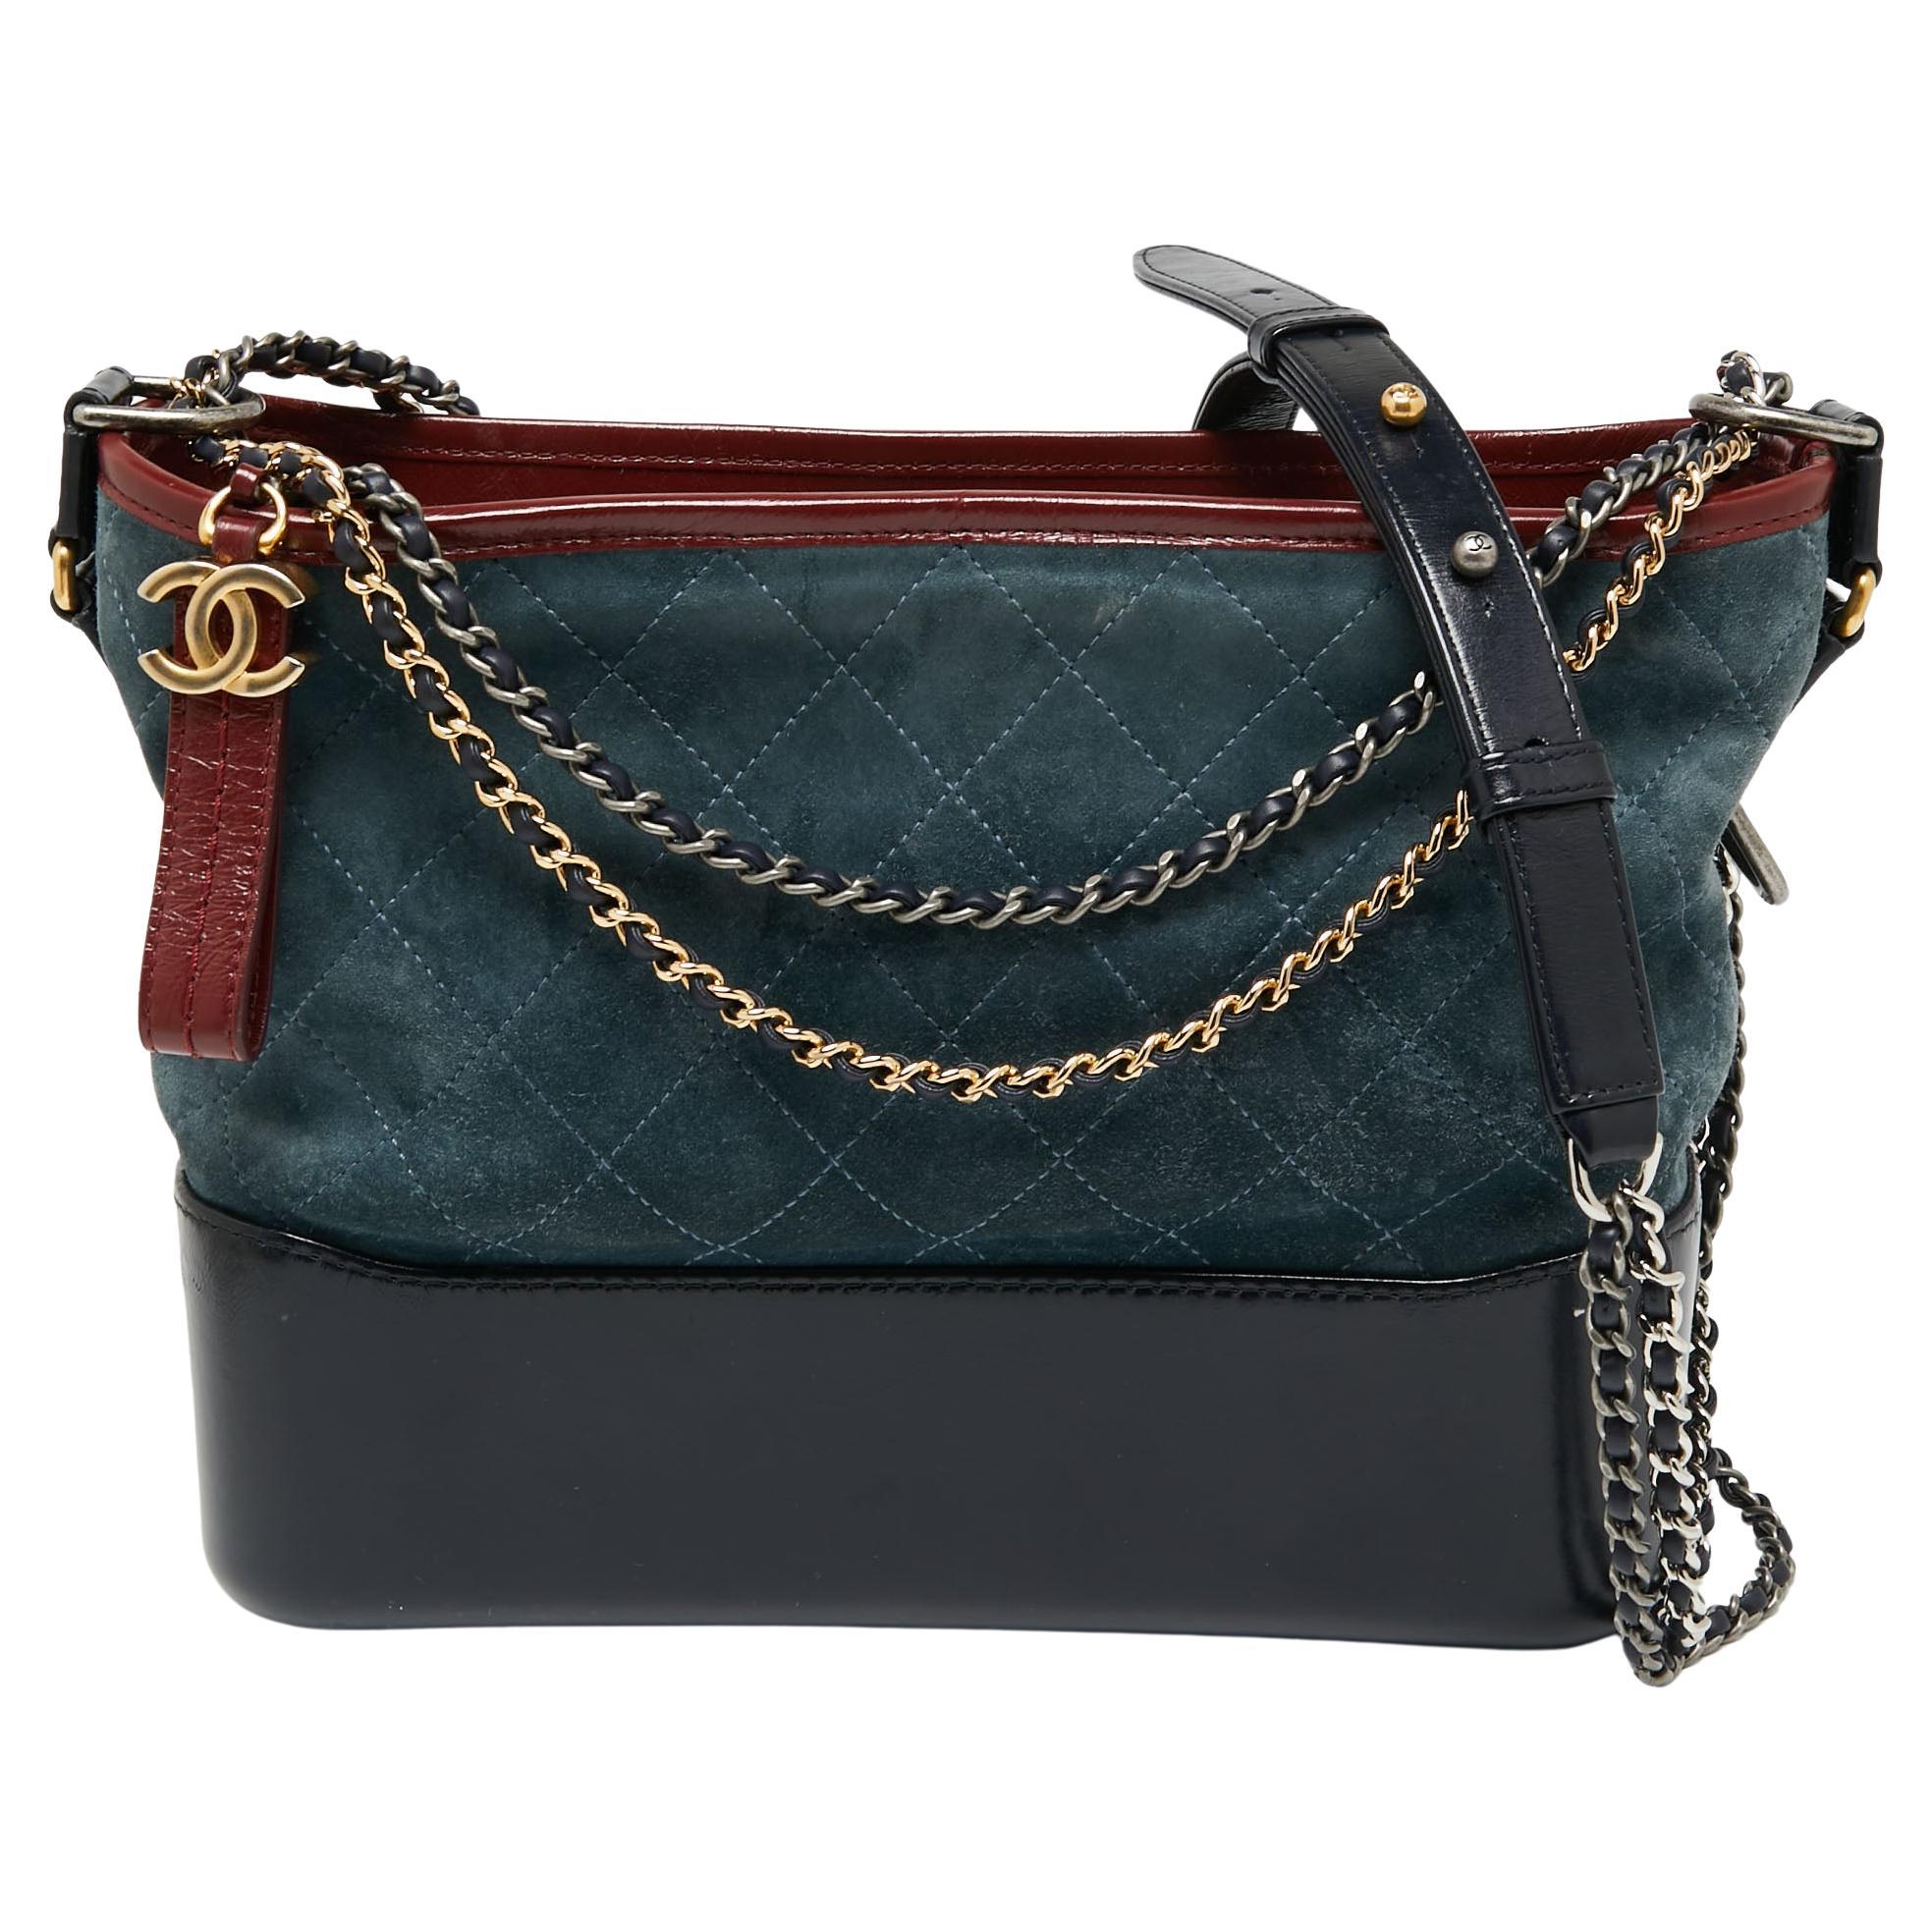 Chanel Blue/Black Quilted Suede And Leather Medium Gabrielle Hobo